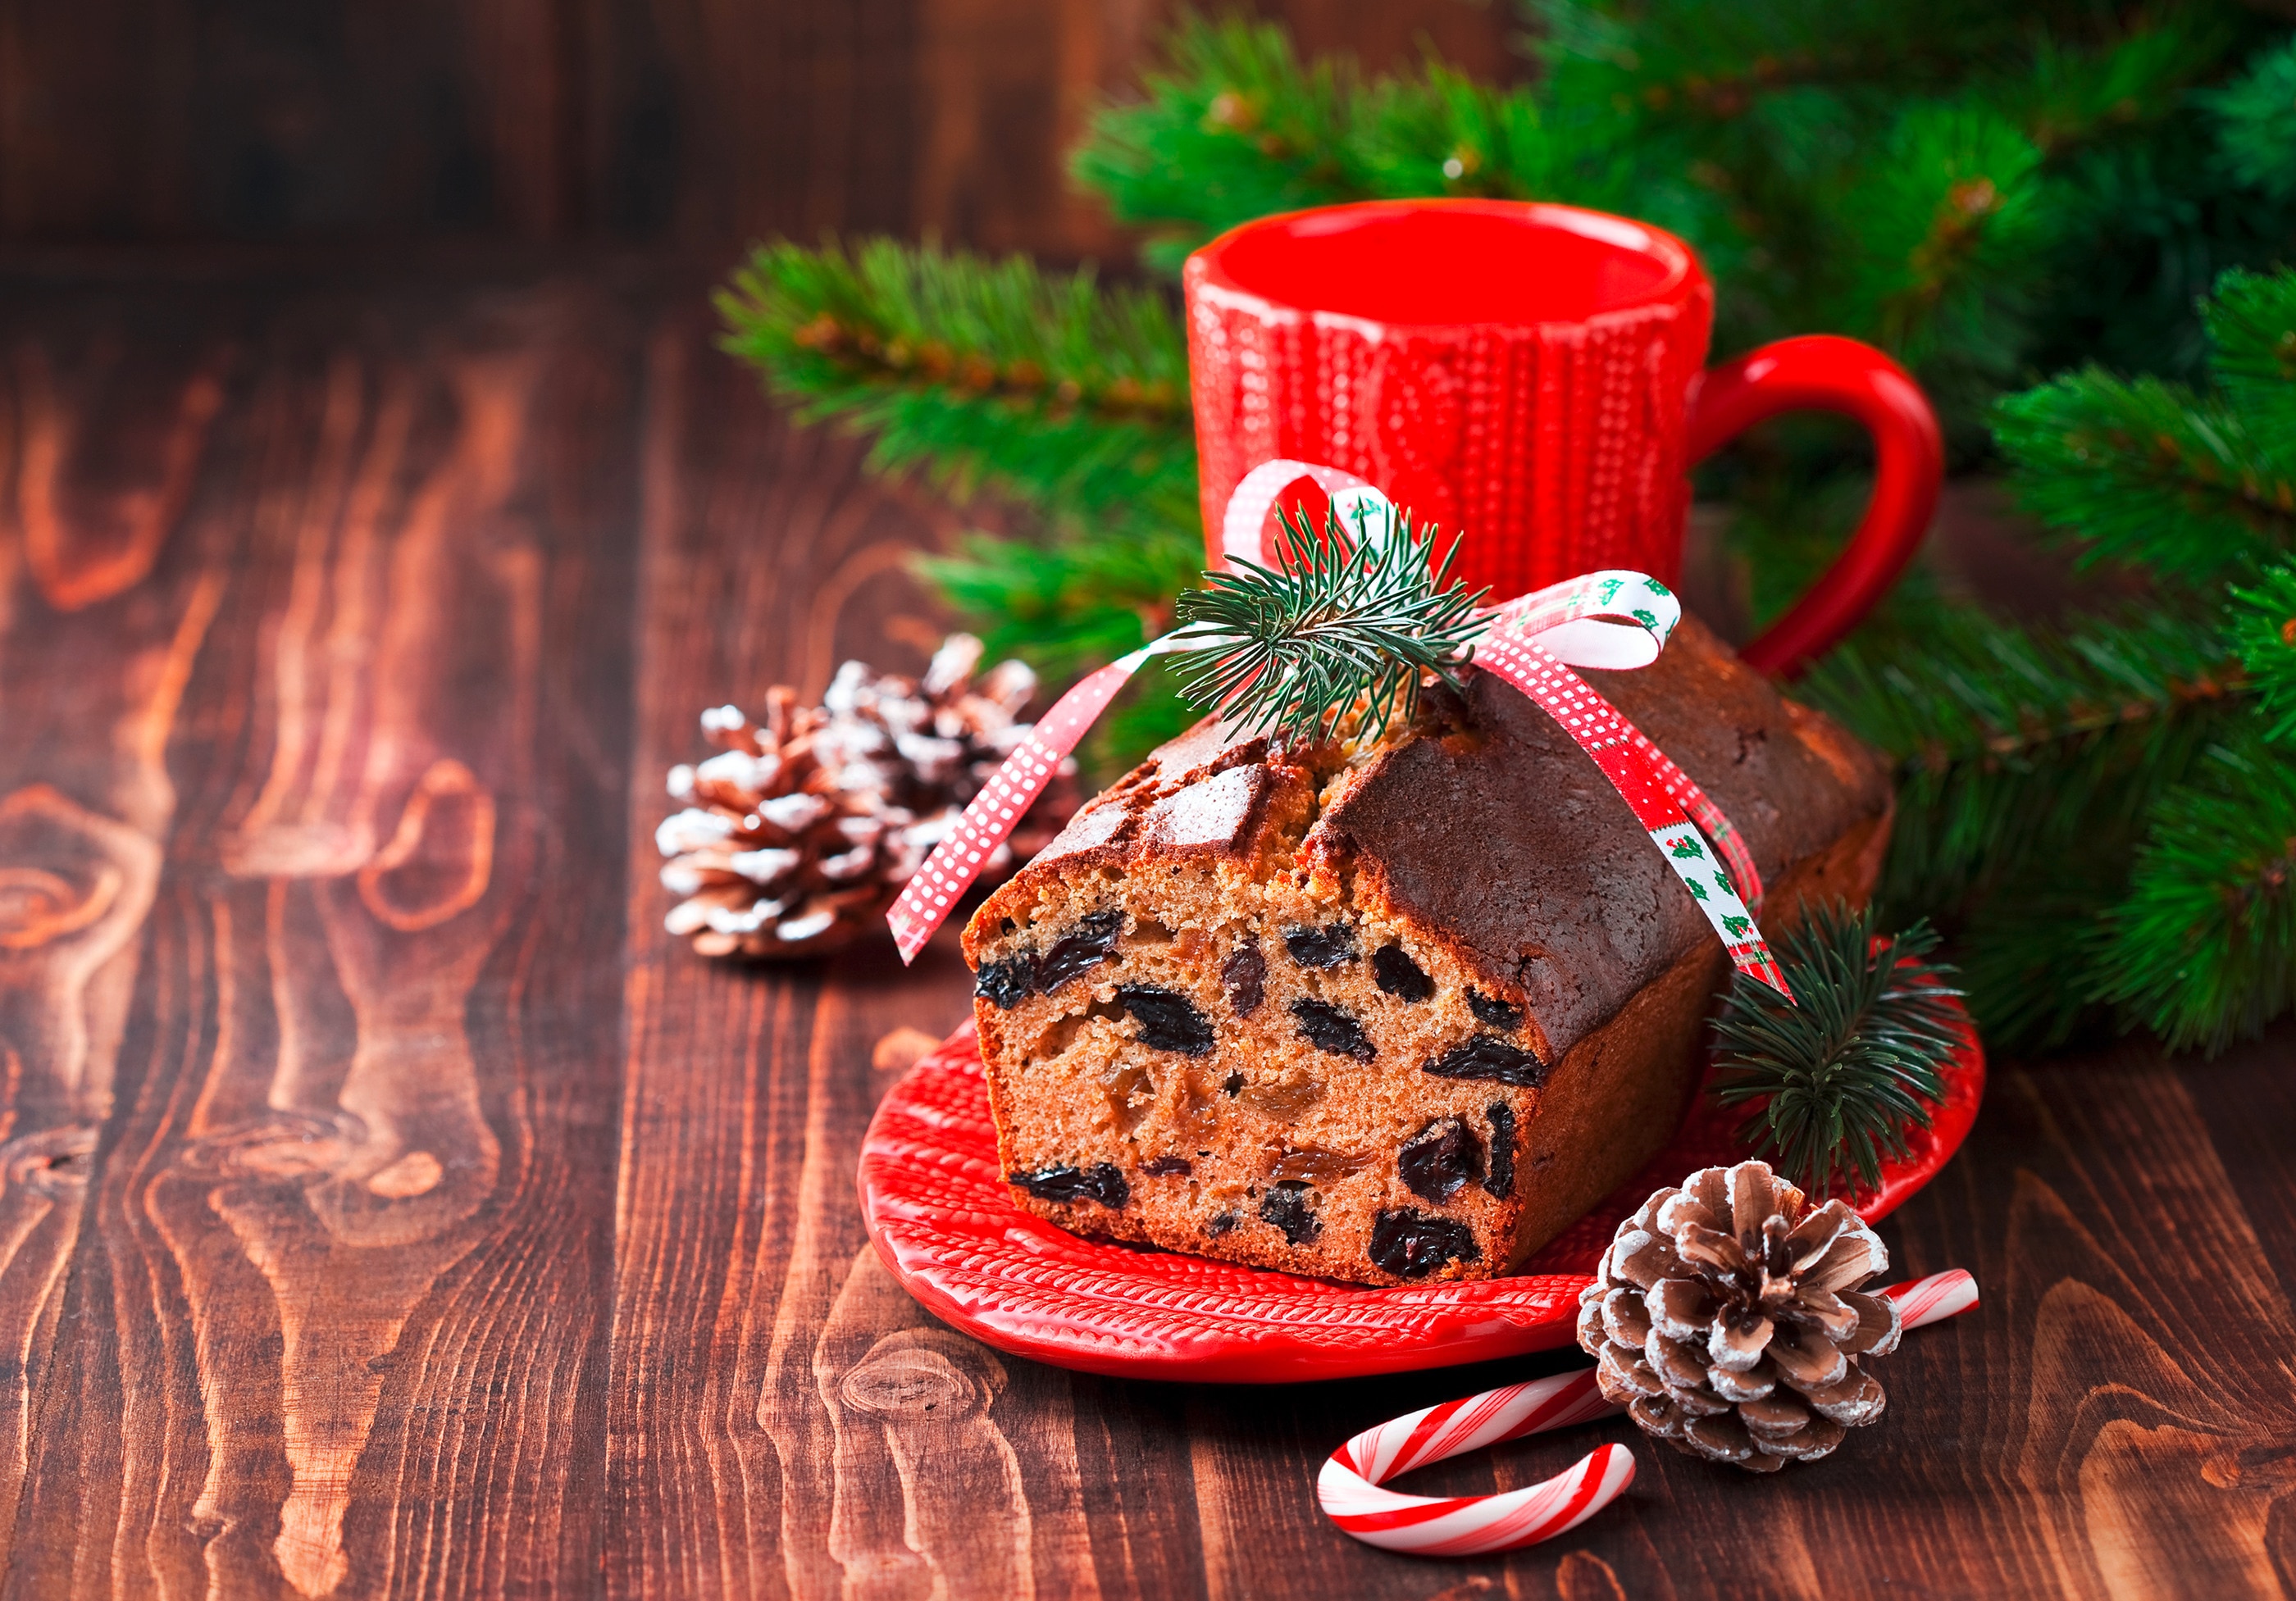 A loaf of fruitcake served on a red plate with Christmas ornaments